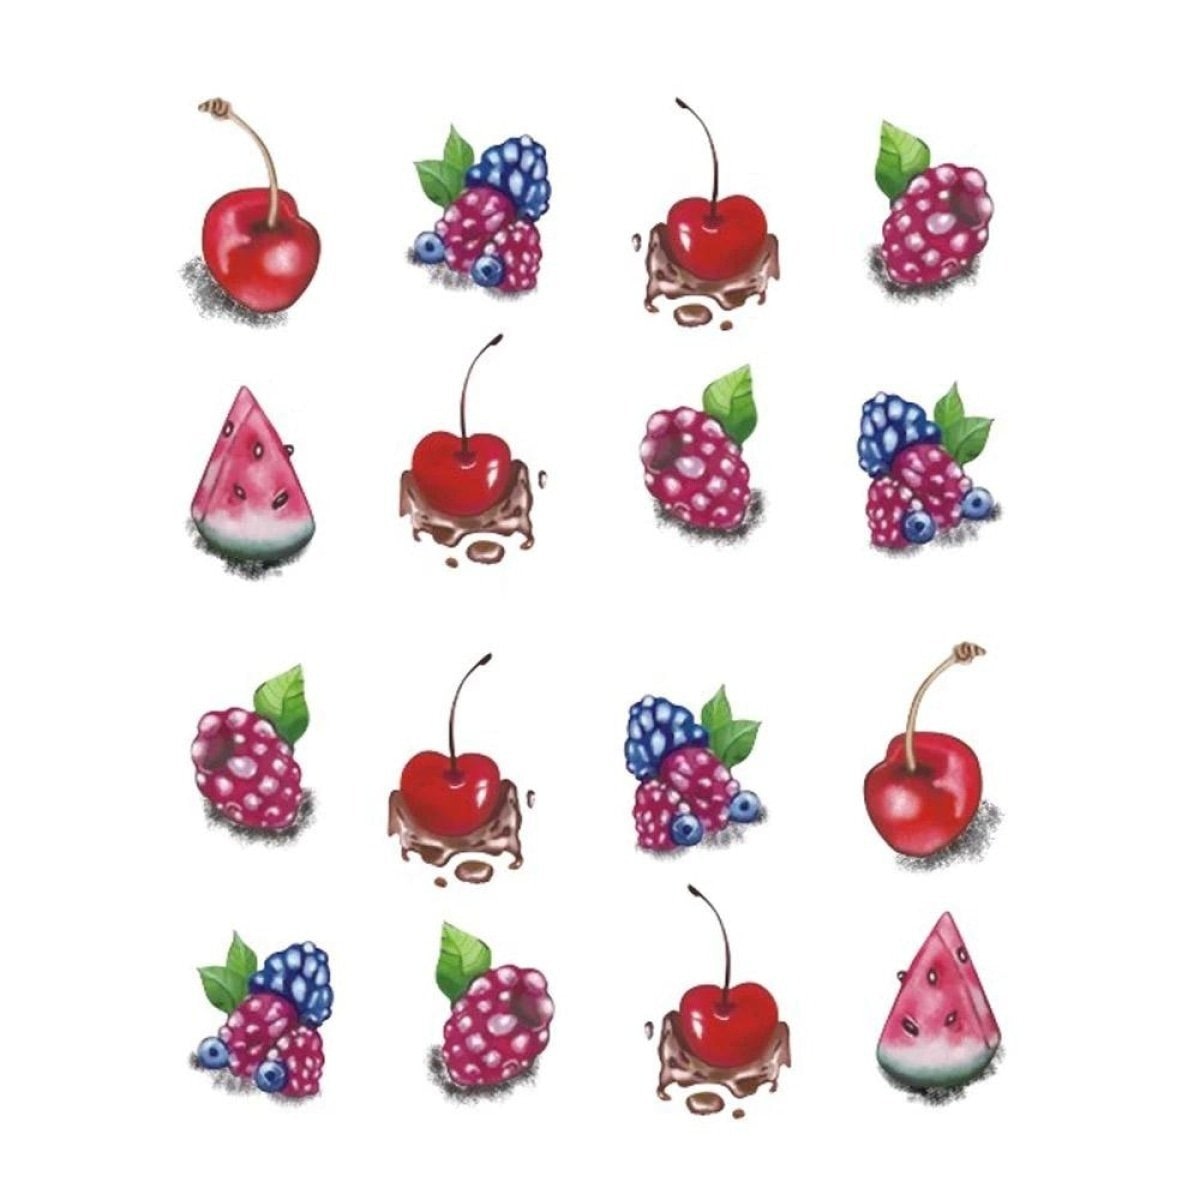 Strawberry Summer Cake & Fruit Stickers For Nails Nail Manicure Art - Stz-491 Sheet